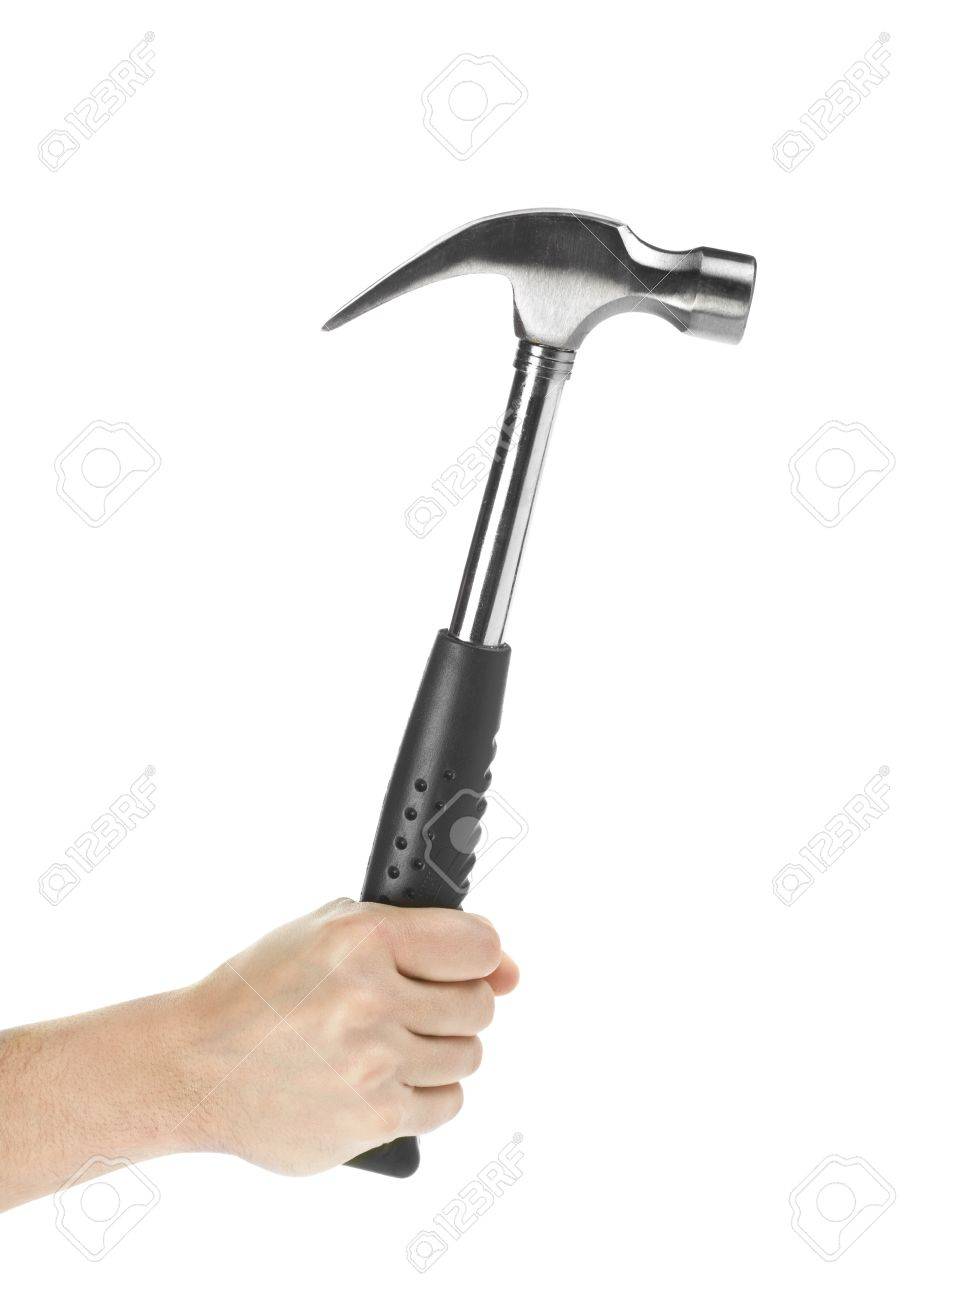 17250023-claw-hammer-holding-by-the-human-hand.jpg